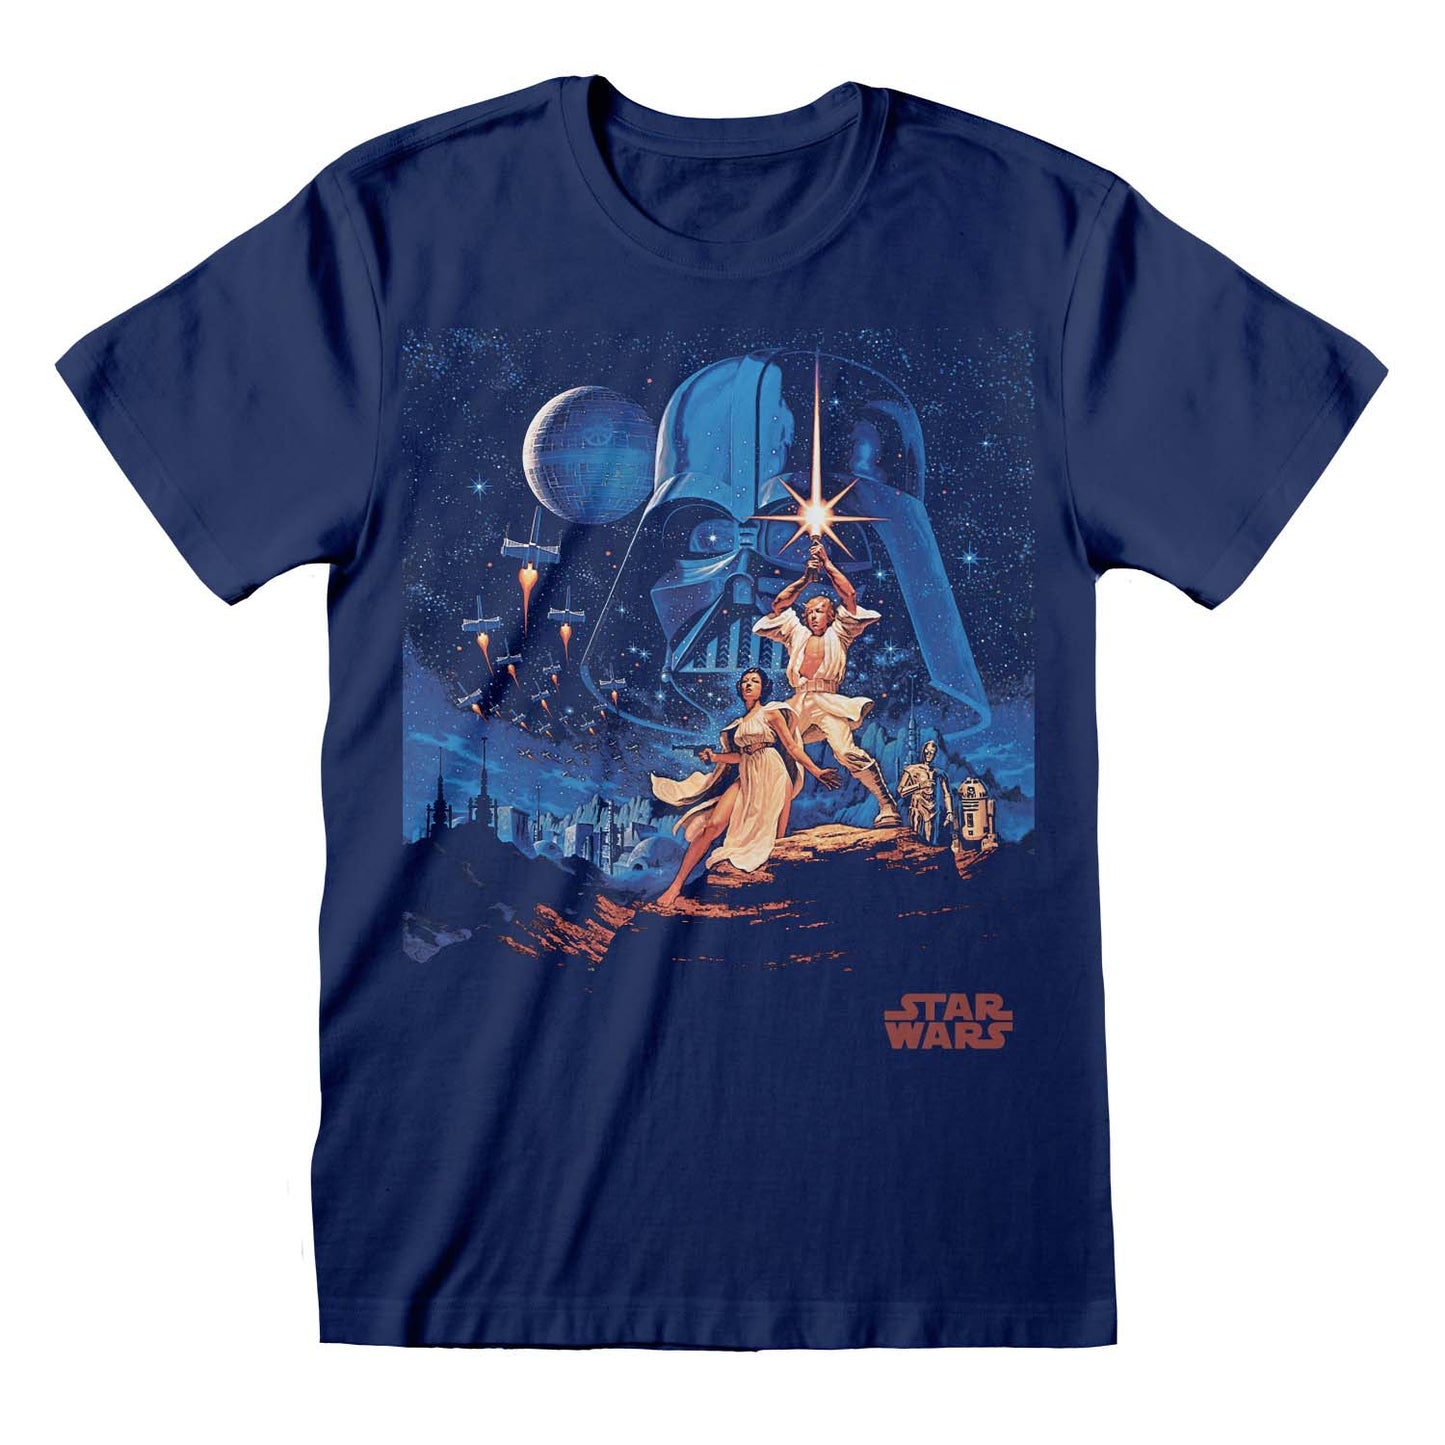 STAR WARS - A New Hope Vintage Poster T-Shirt